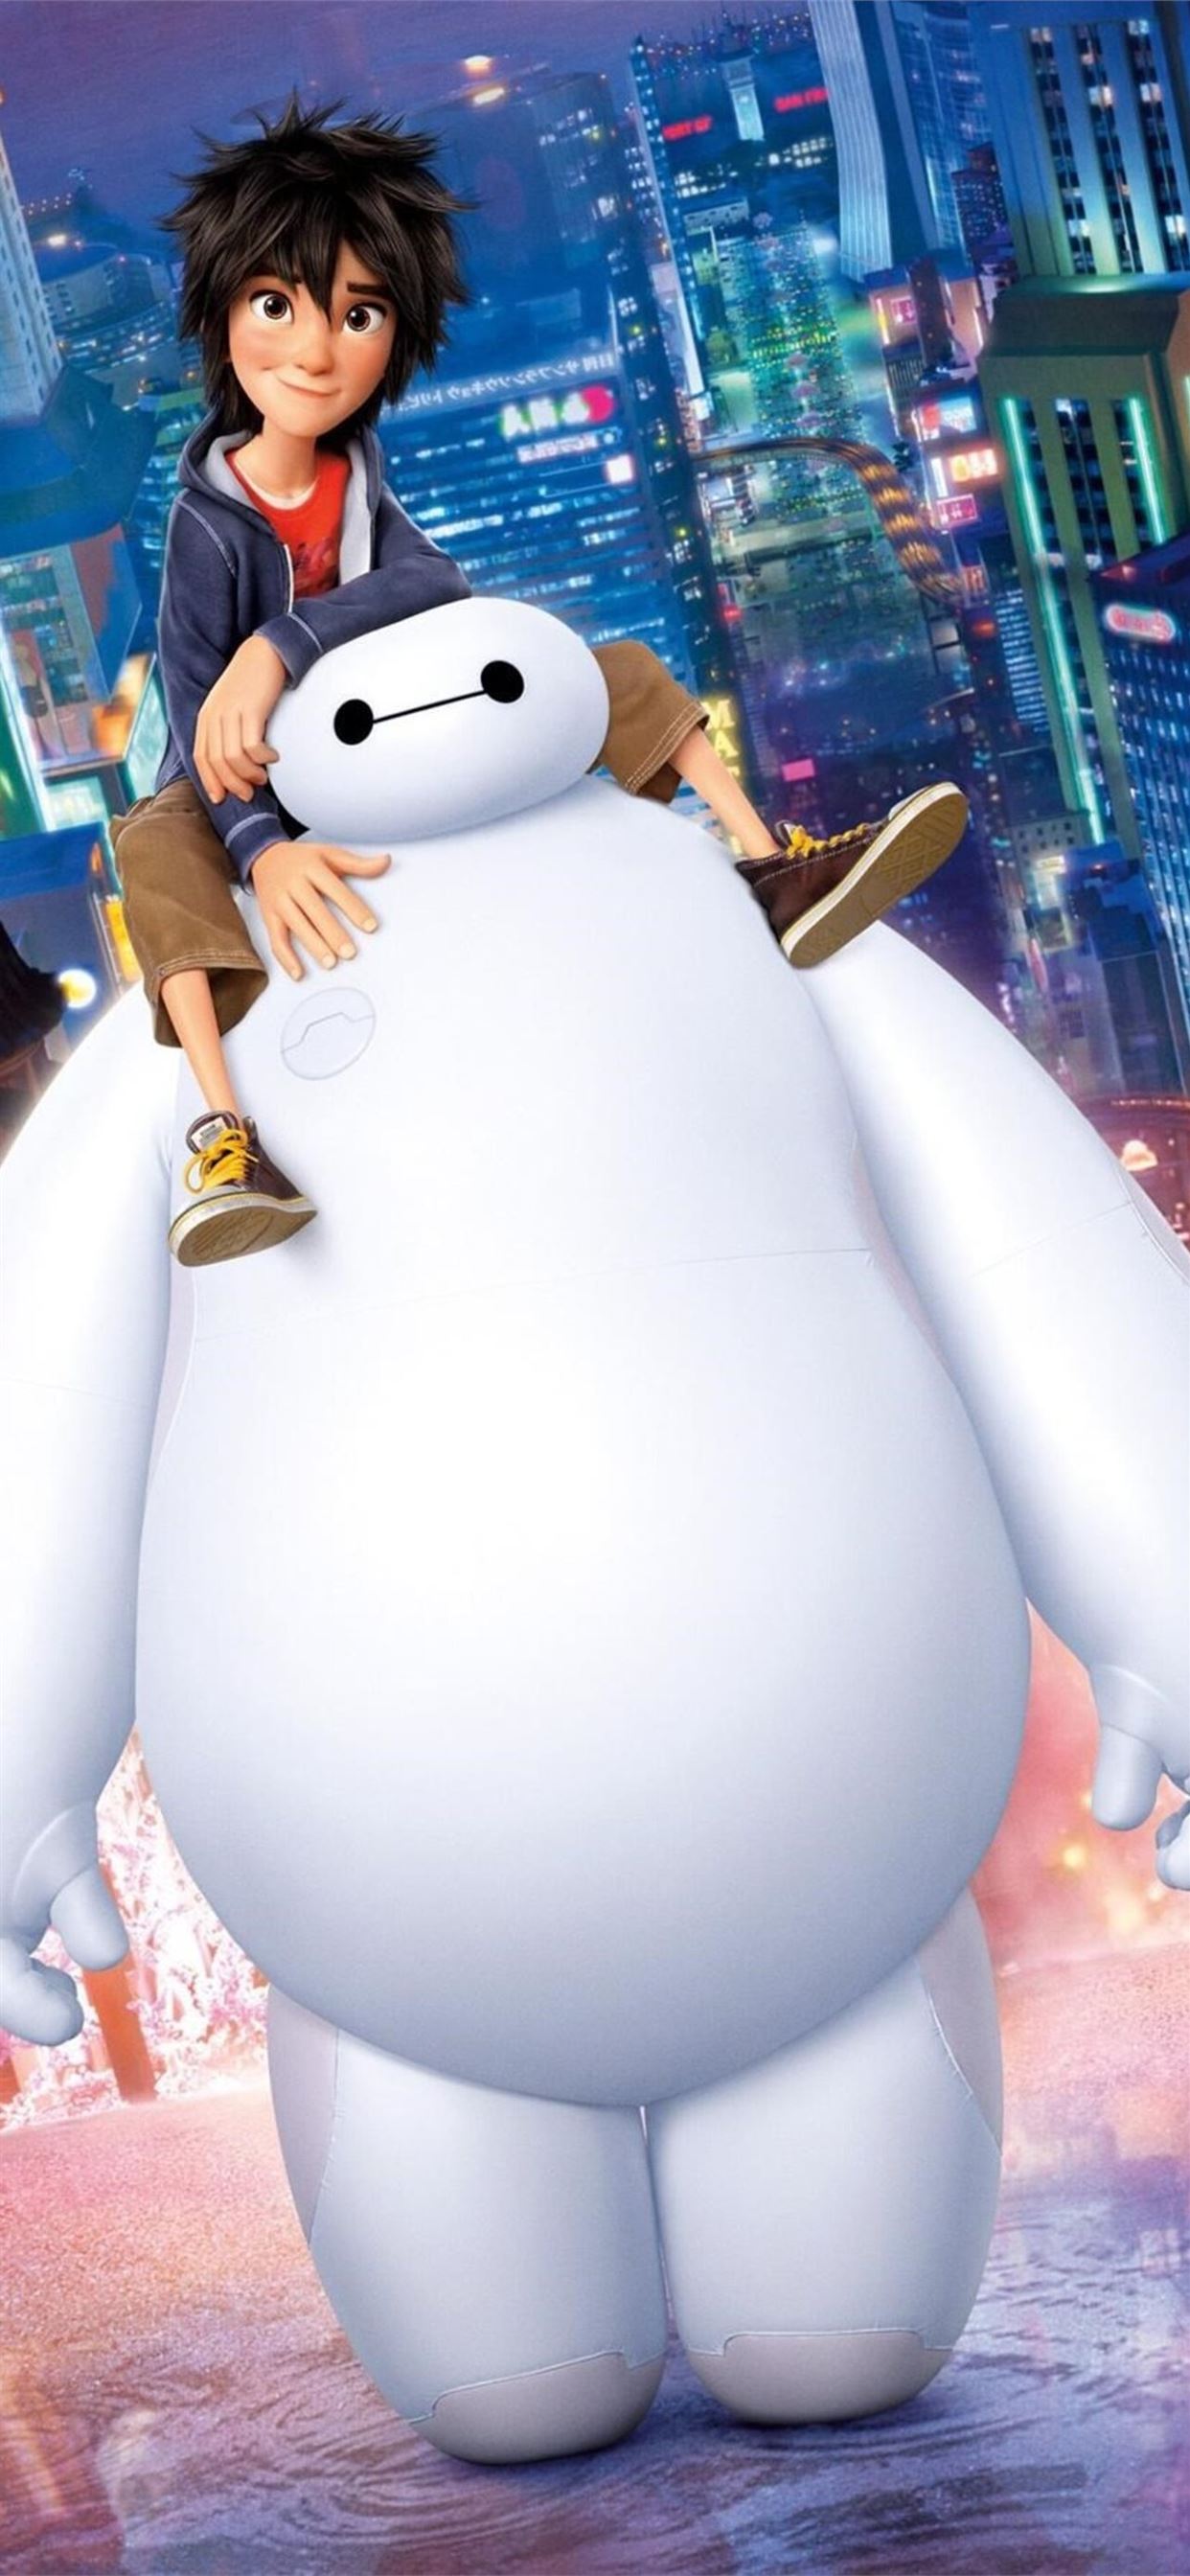 Big Hero 6 Baymax Samsung Galaxy Note 9 8 S9 S8 S8... iPhone Wallpapers  Free Download